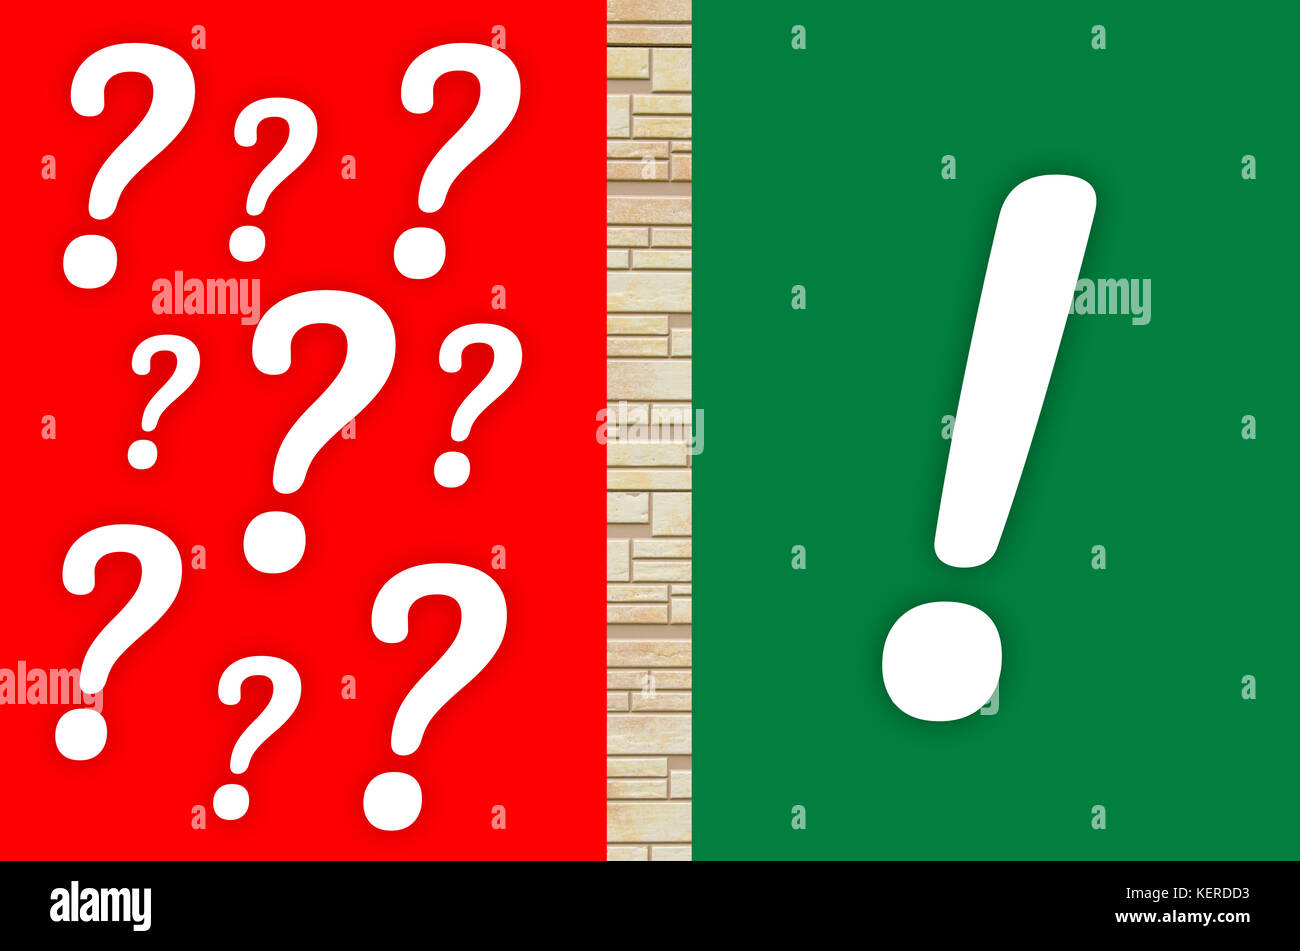 many question marks and only exclamation marks on red-green backround Stock Photo